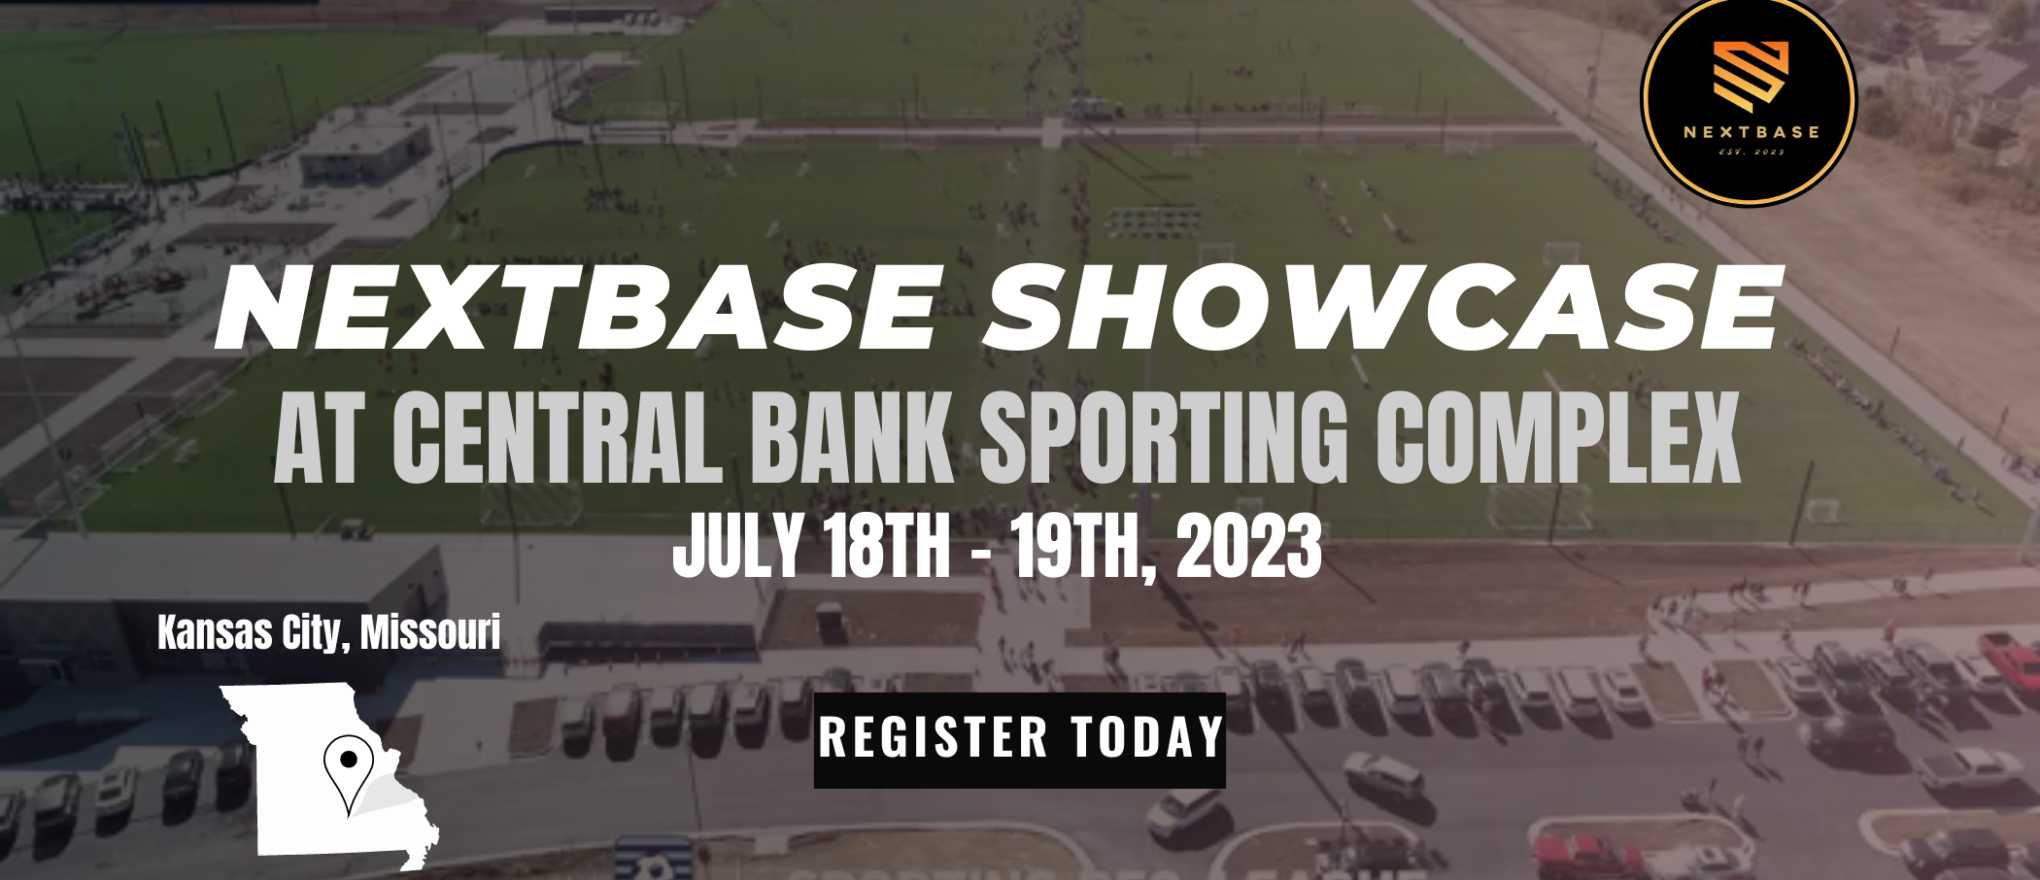 NextBase Showcases at CENTRAL BANK SPORTING COMPLEX